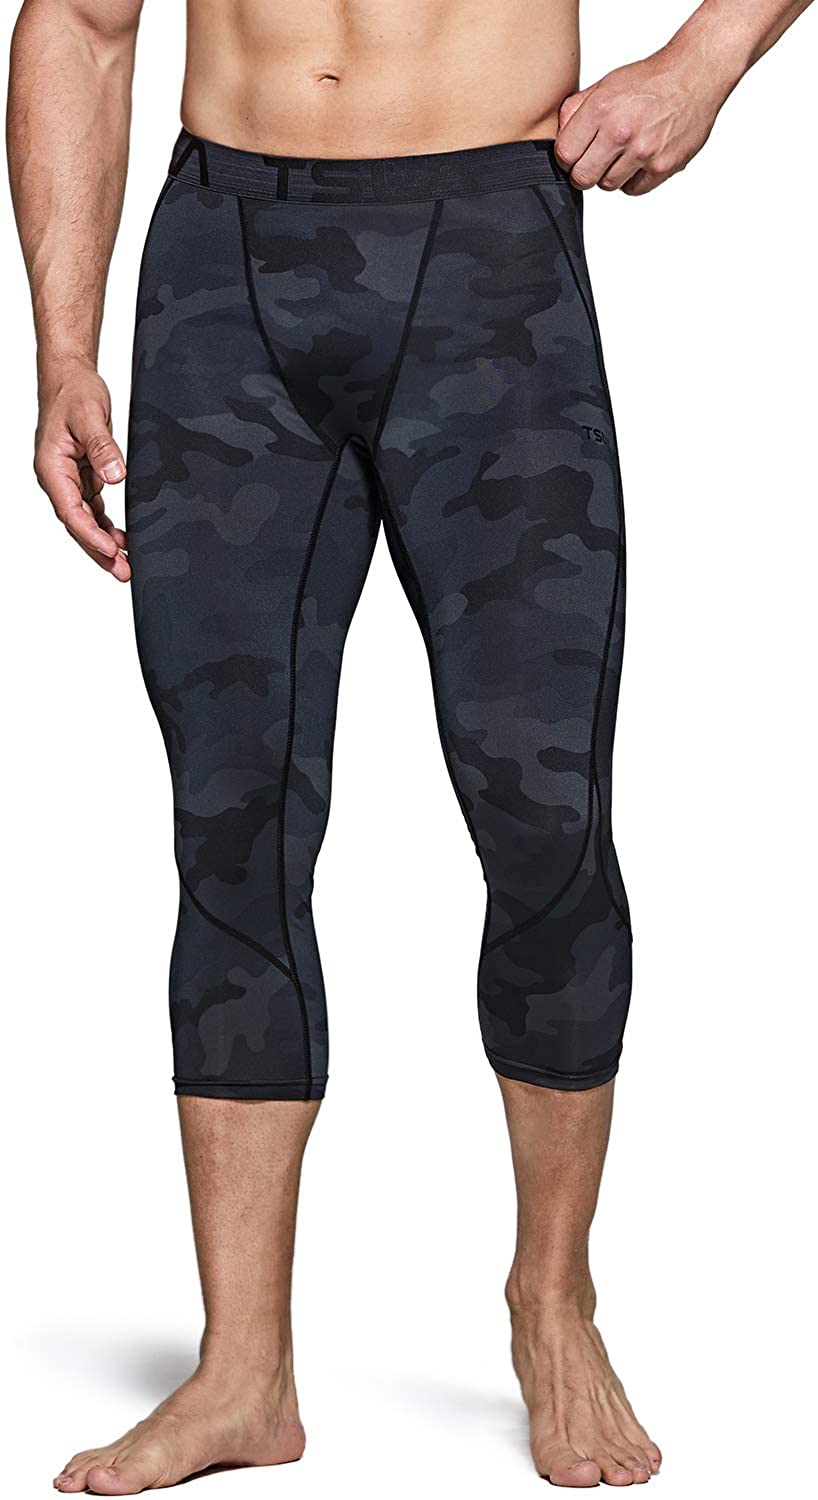 TSLA 1 or 2 Pack Men's 3/4 Compression Pants, Running Workout Tights, Cool  Dry C | eBay